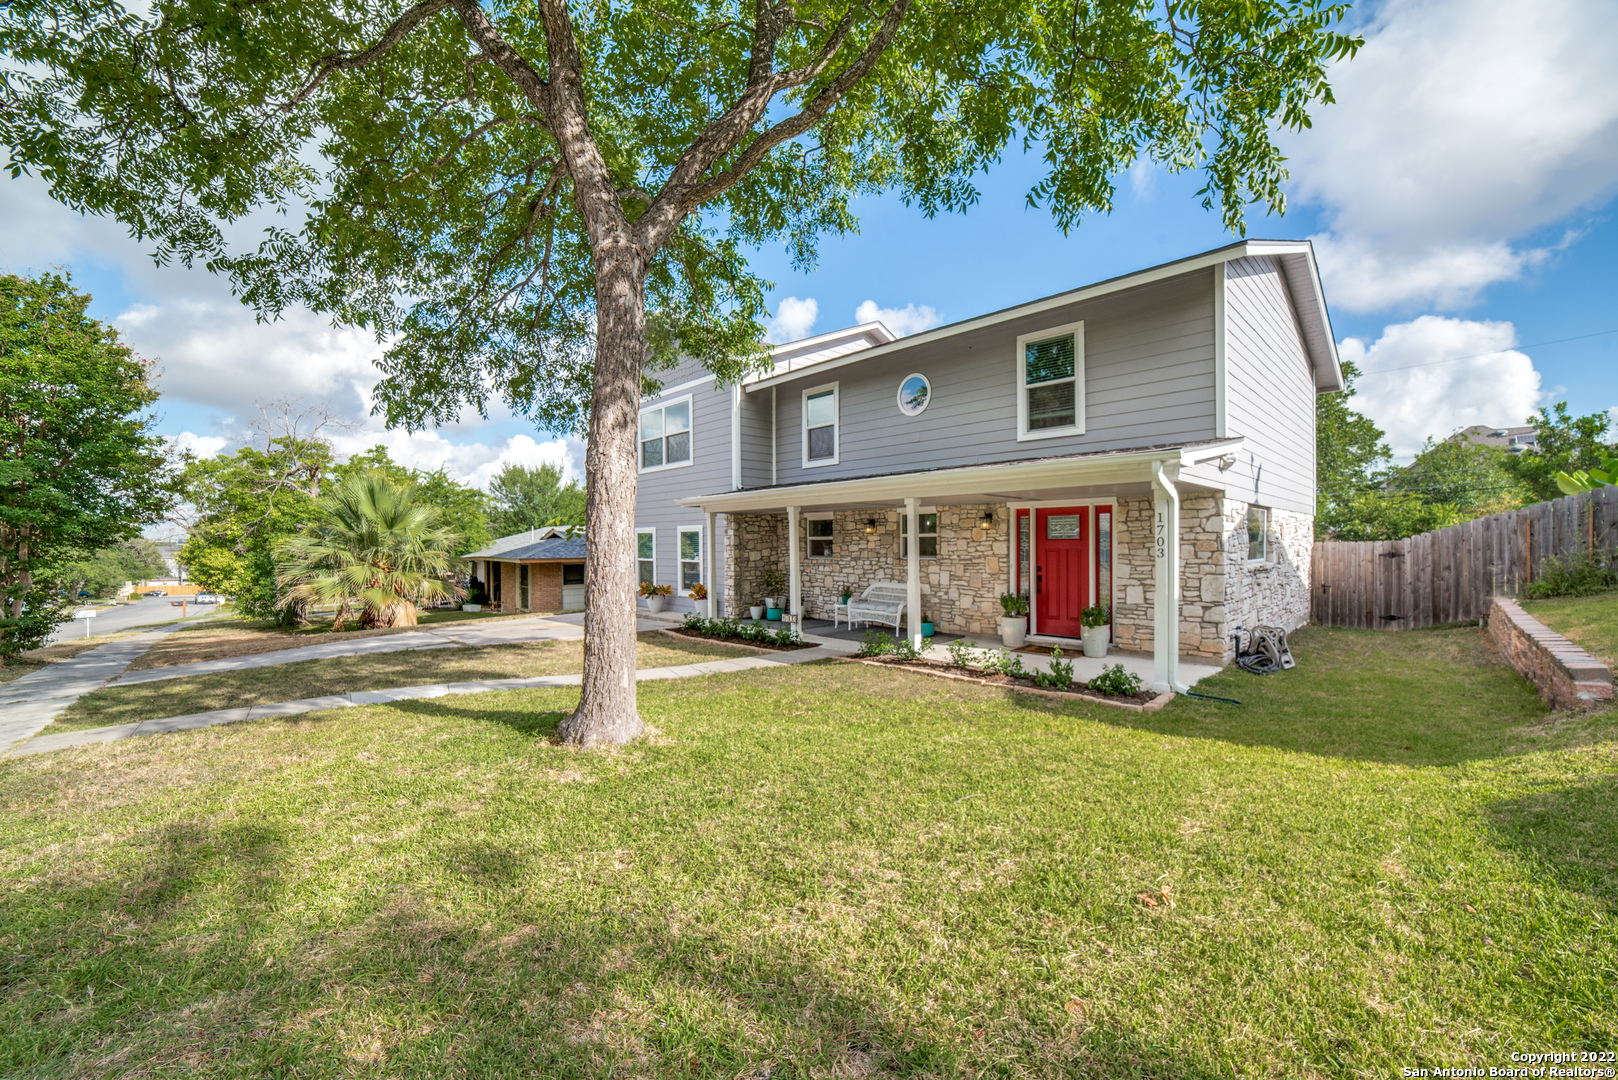 A gem in a special AHISD neighborhood, this home was meticulously renovated top-to-bottom in 2018, complete with designer touches throughout, and not forgetting the important stuff- i.e., the plumbing, electric, HVAC, and roof/gutters (2022). Additional converted garage gives over 1,000 sq ft of living space, perfect for a family, with 4 bedrooms (all upstairs) and 3 full bathrooms. Kitchen is beautiful, with Maplewood cabinets, quartz countertops, and marble backsplash. High-end appliances including a Plenty of space on the island to serve your family, top-of-the-line appliances, and spacious pantry. Other highlights include hickory scraped hardwood floors, designer lighting throughout, and a great sized yard. Walking distance to restaurants, shopping, and Howard ECC. Owner financing available with 20% down.